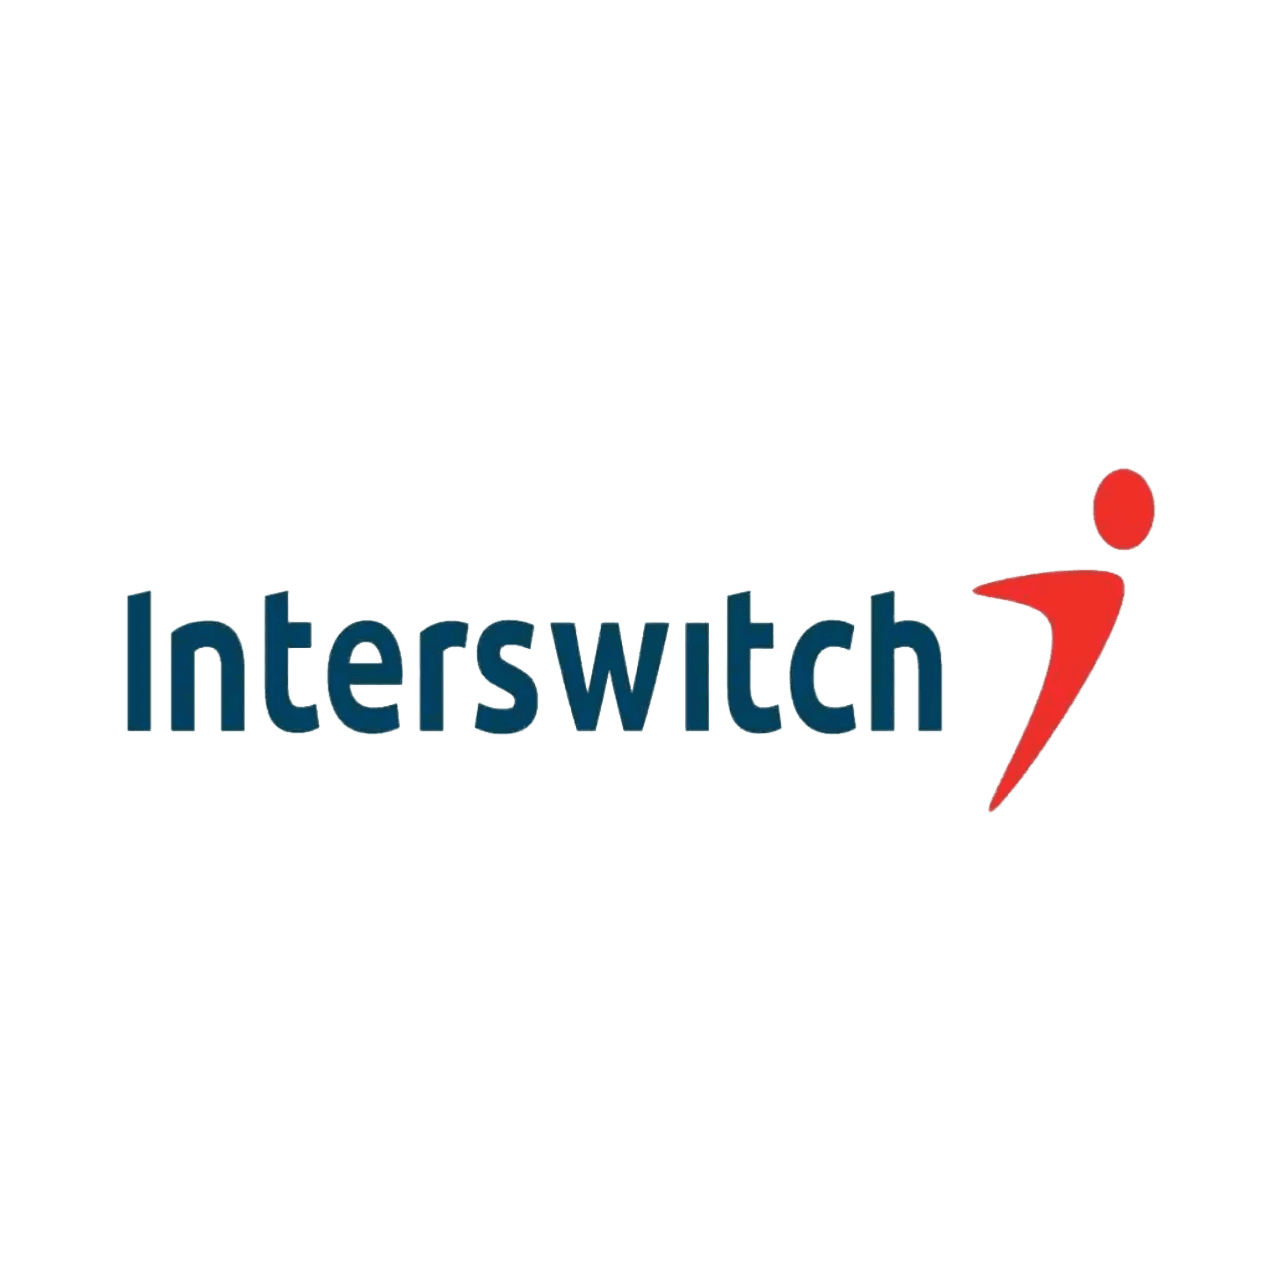 Kaffy has worked with Interswitch Company and brand